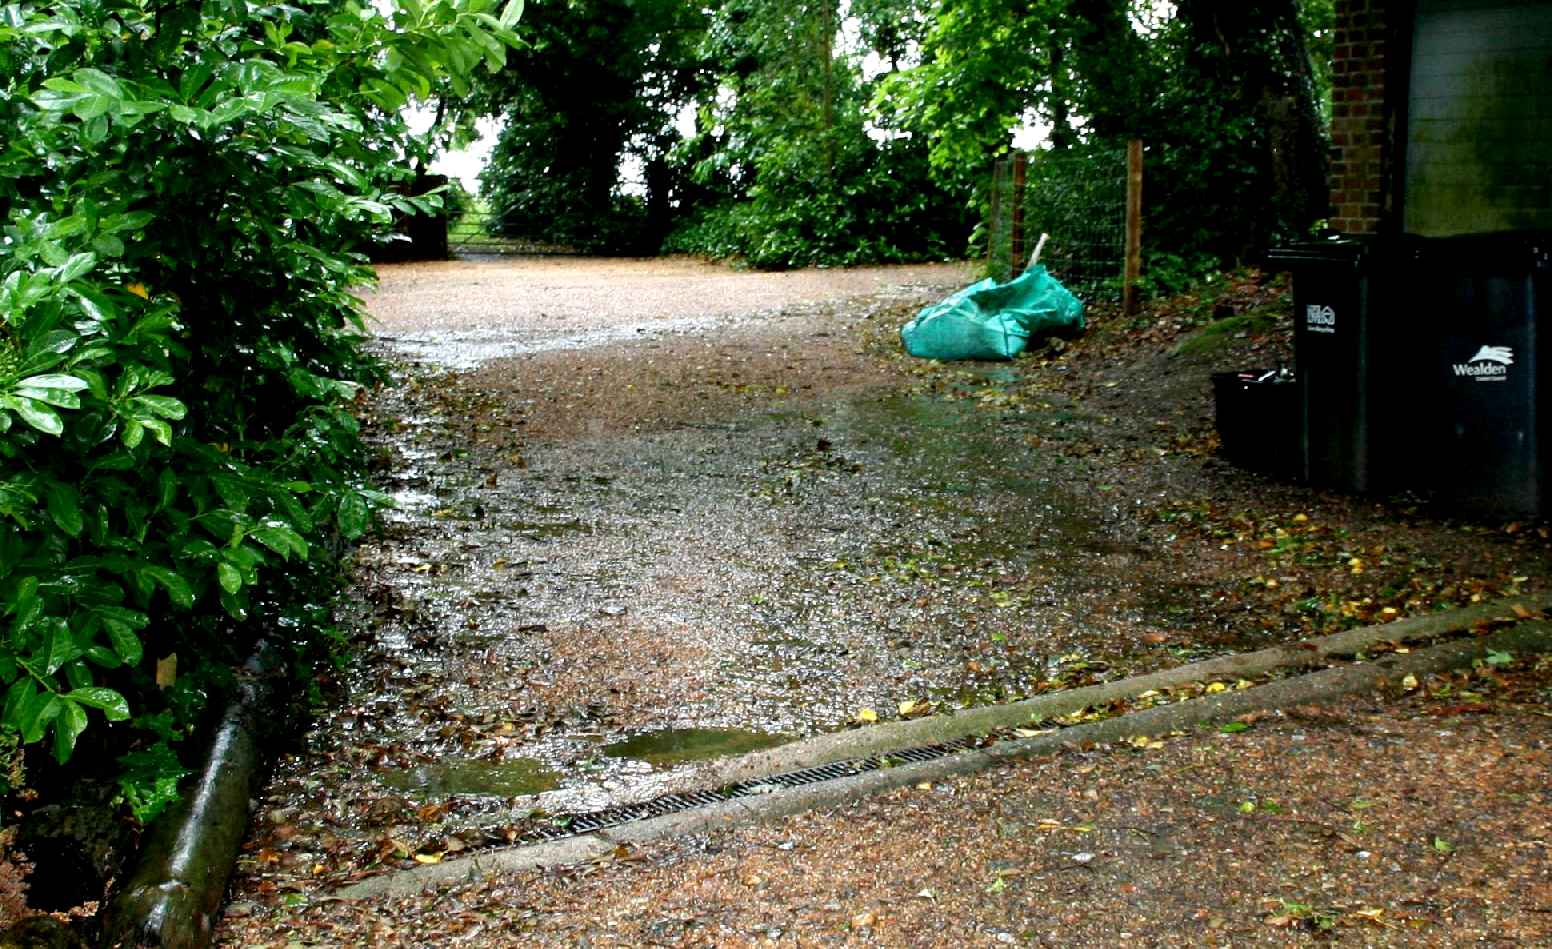 The shared gravel drive in Lime Park, Herstmonceux